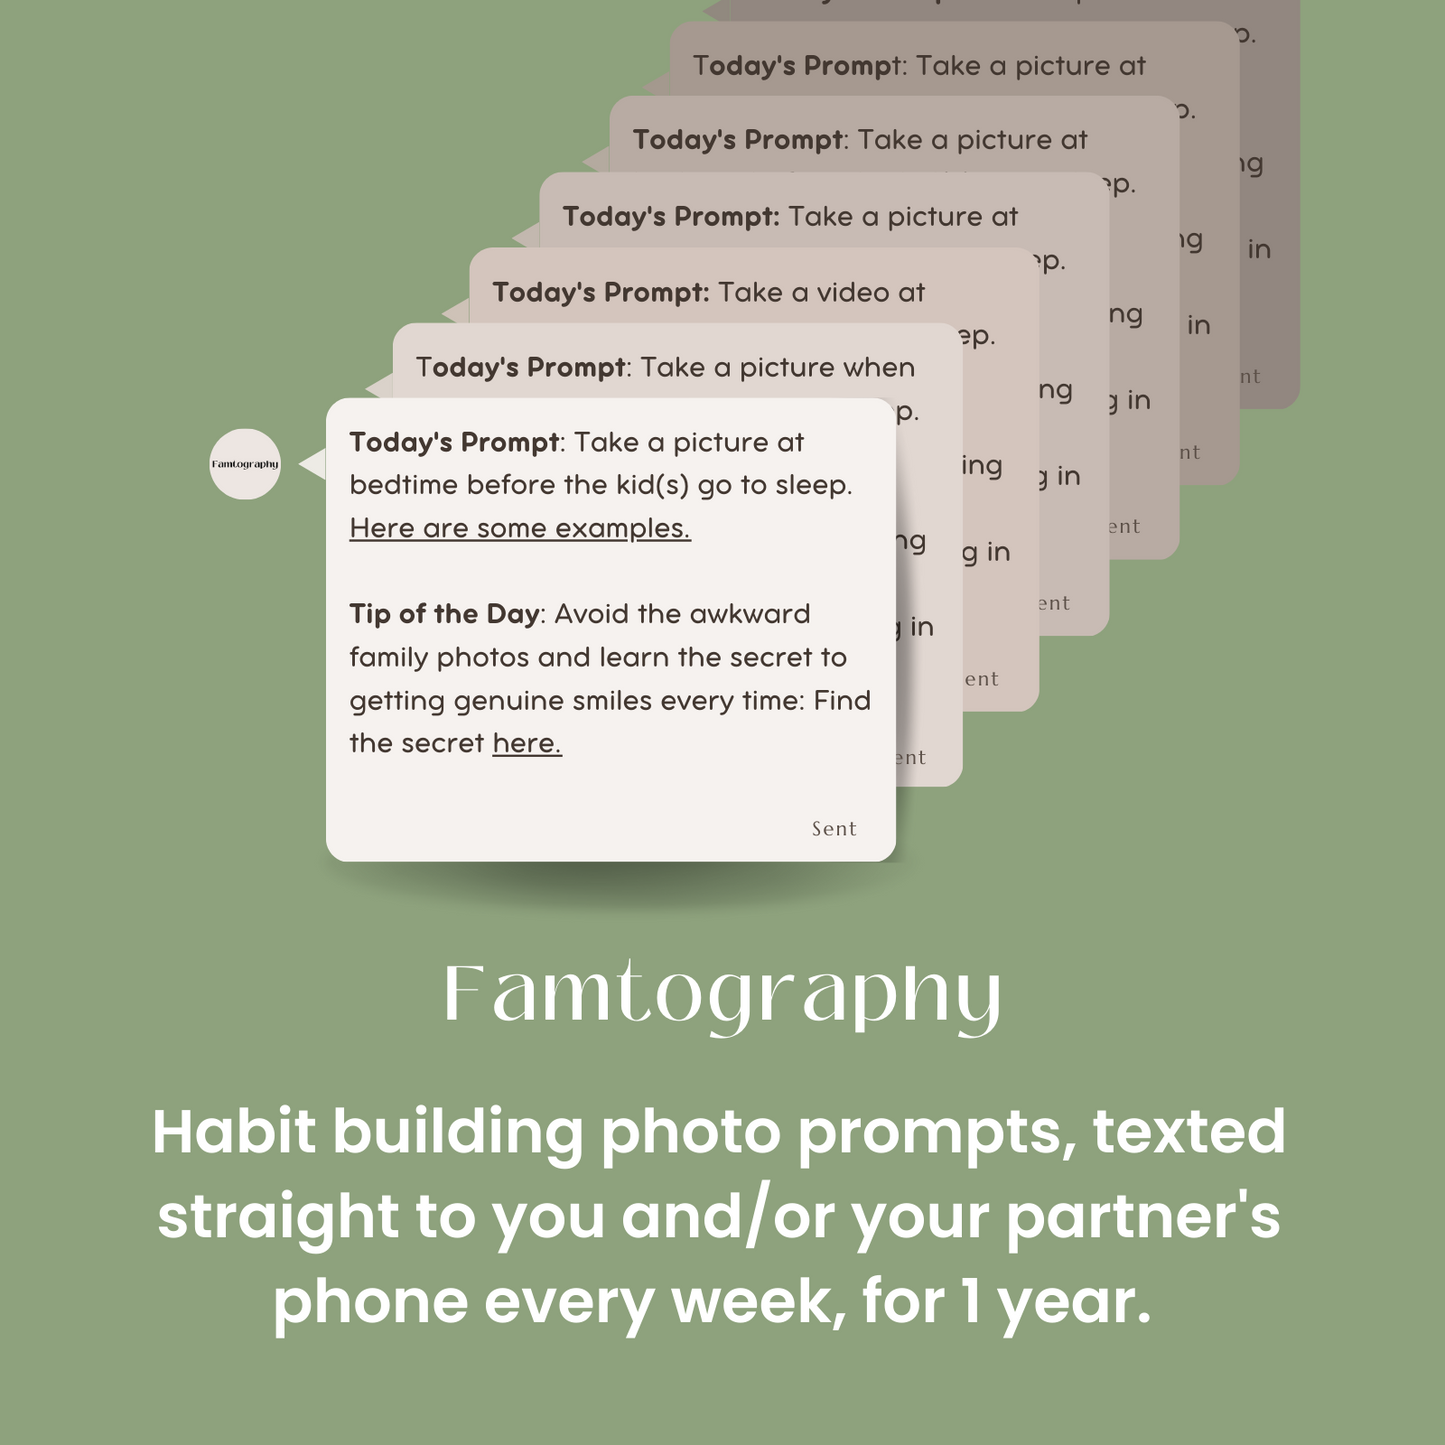 52 Famtography E-mail Prompts & Mastering the Art of Mobile Family Photography Bundle for Partners (UK Residents)